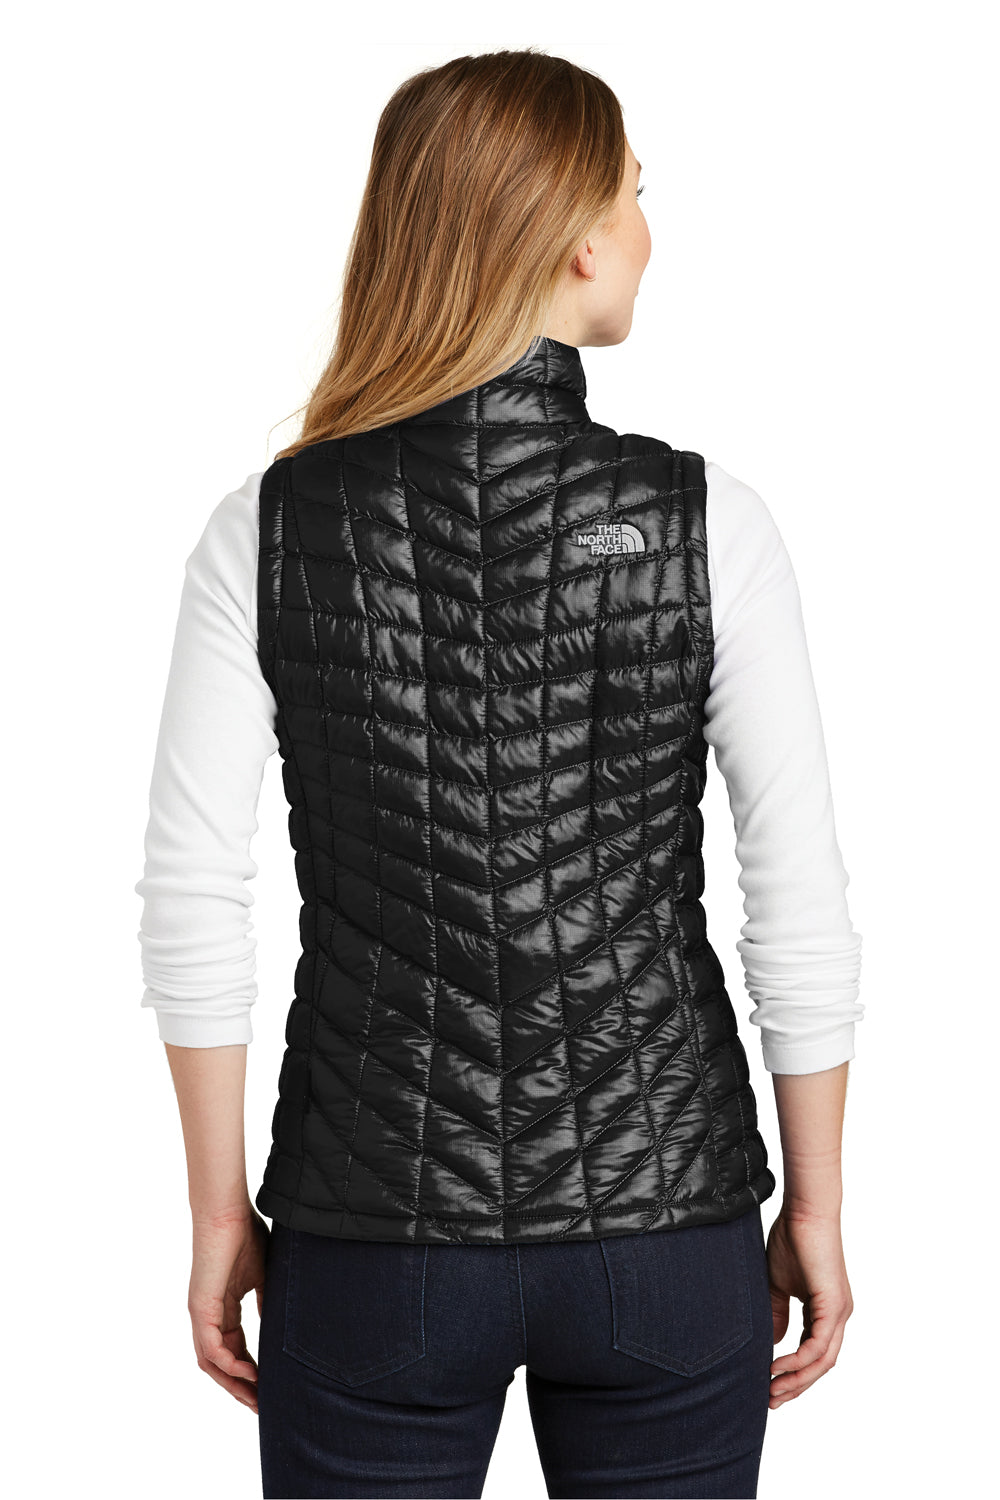 The North Face NF0A3LHL Womens ThermoBall Trekker Water Resistant Full Zip Vest Black Back